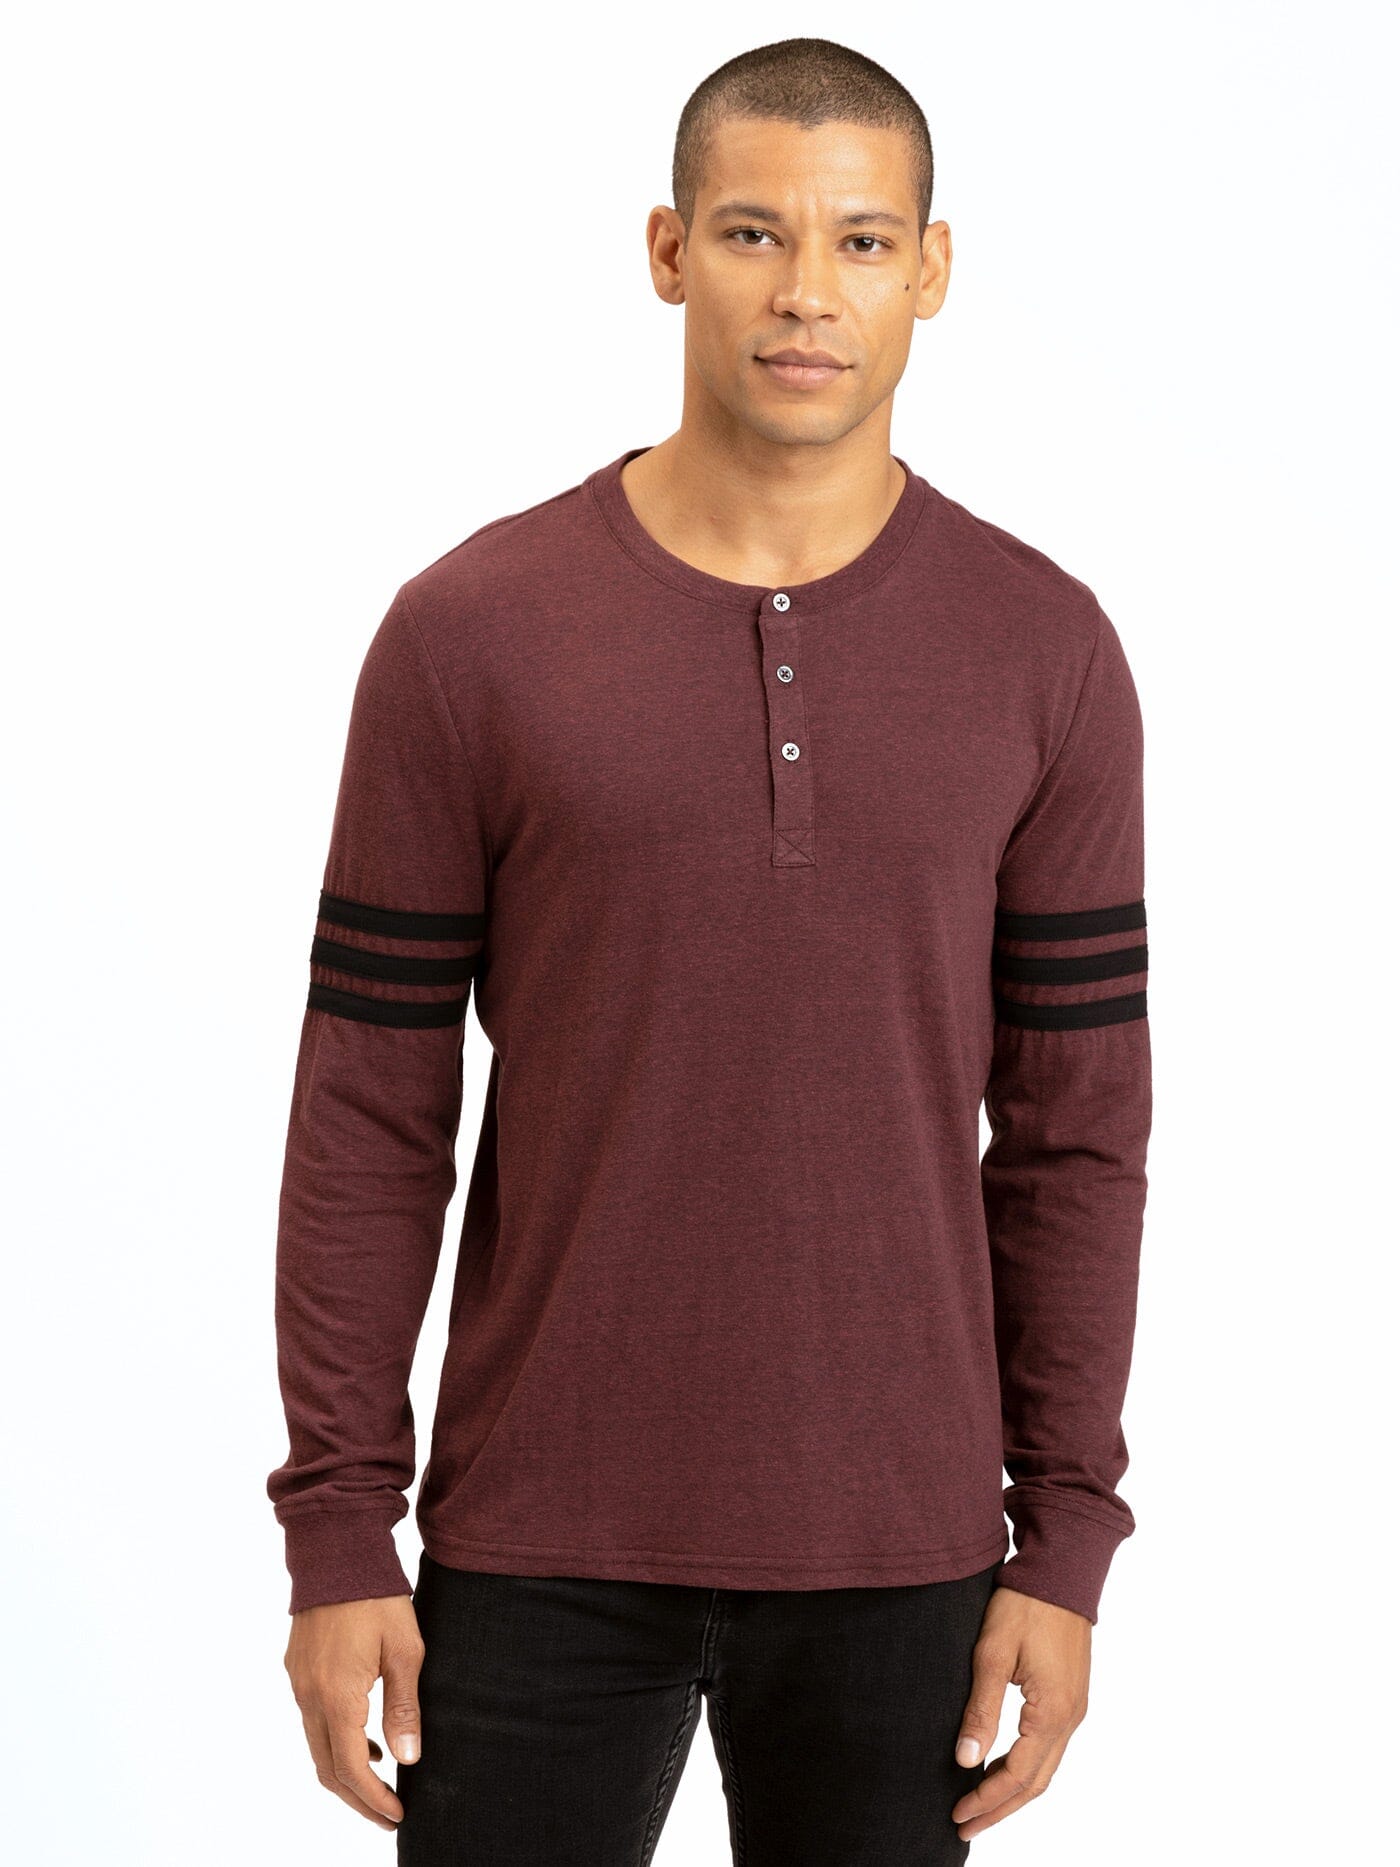 Dewey Stripe Triblend Graphic Henley Mens Tops Tshirt Long Threads 4 Thought 